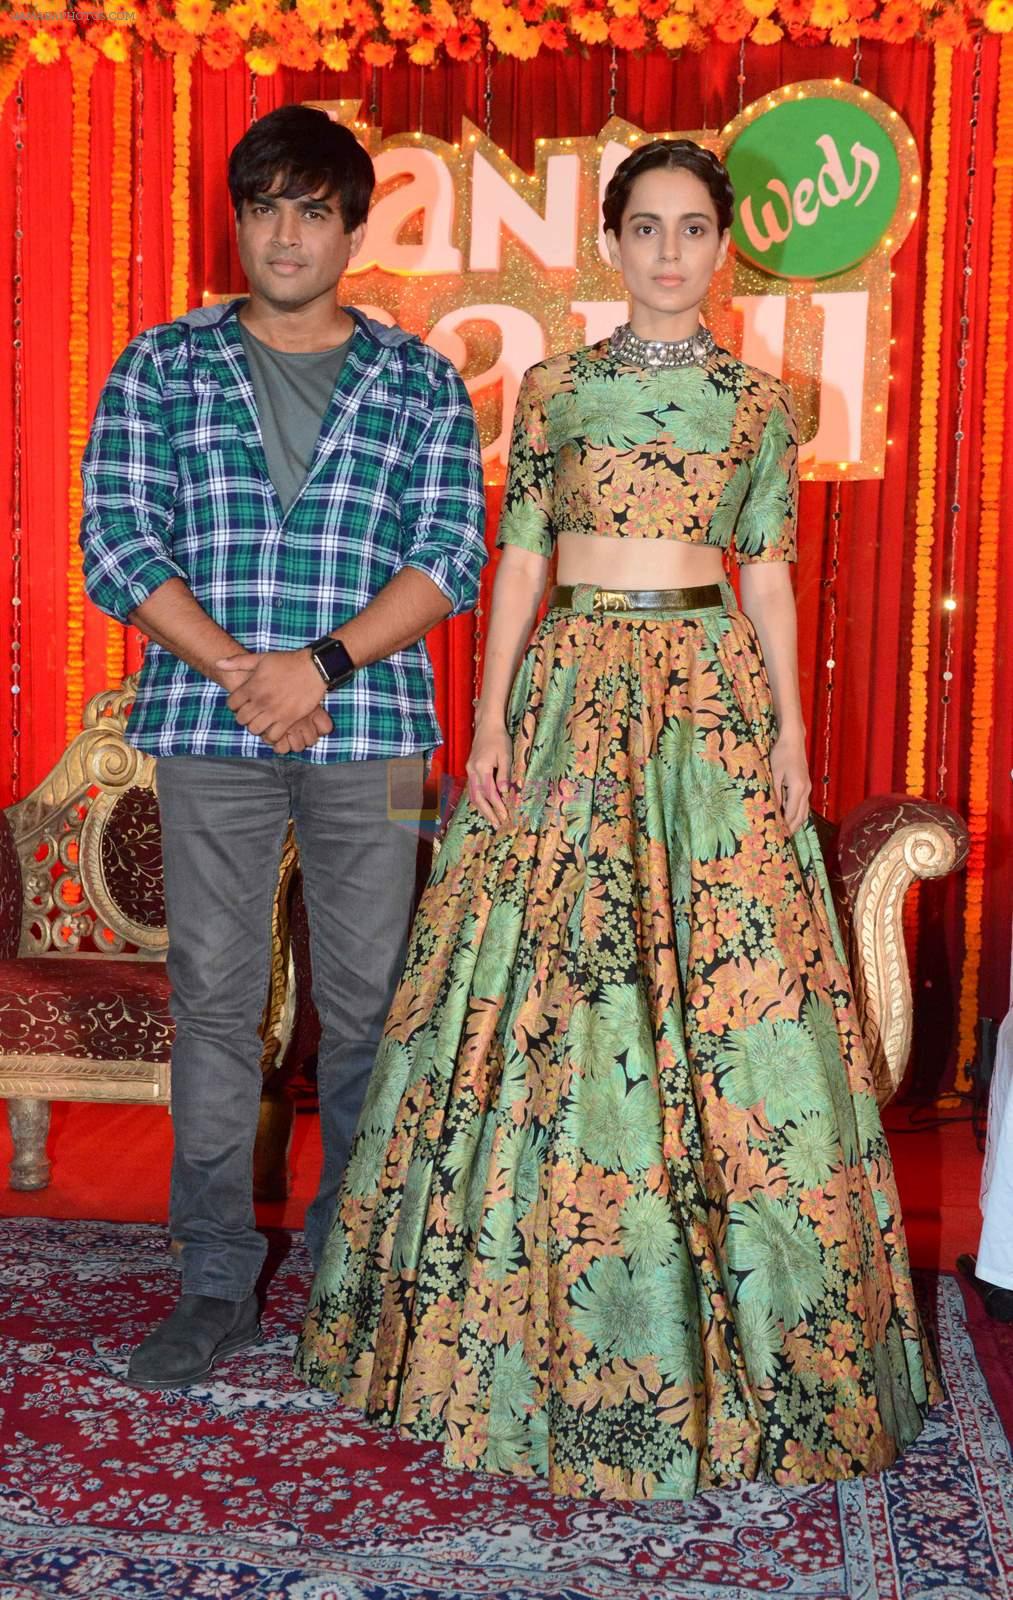 Kangana Ranaut, R Madhavan at the press confrence & Poster launch of Flim Tanu Weds Manu Returns at Hotel Dusit Devrana in New Delhi on 23rd March 2015